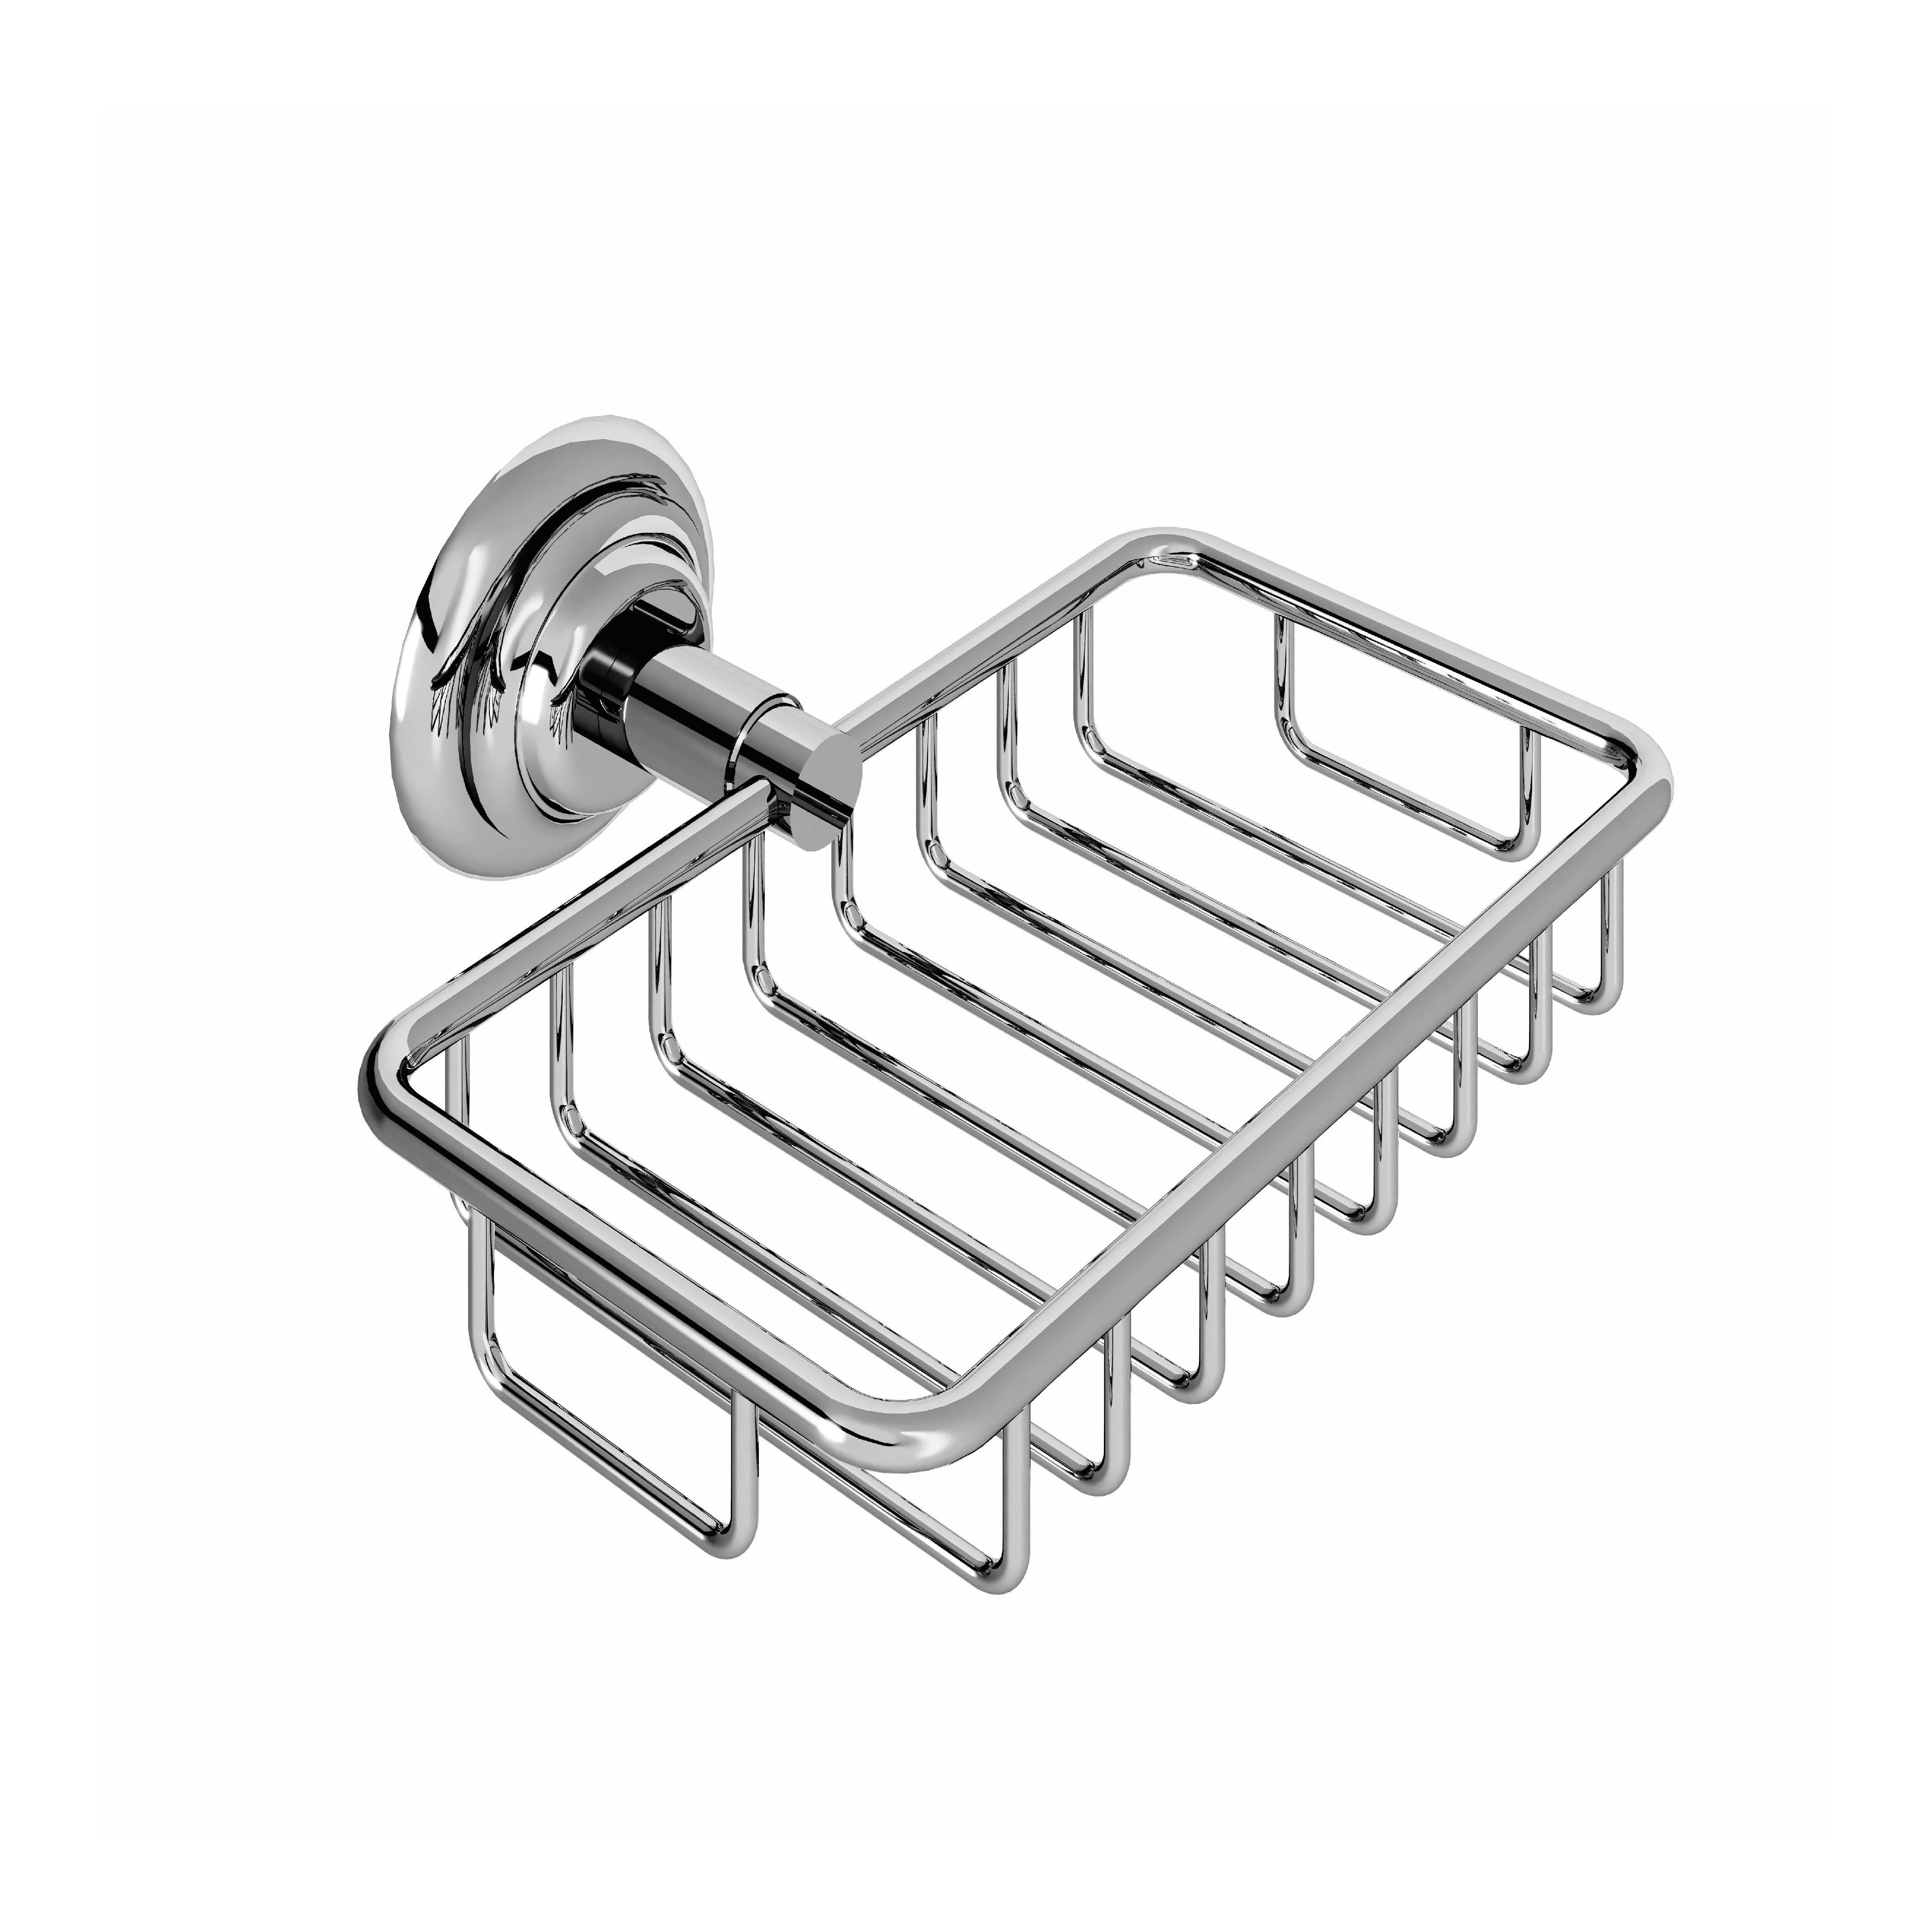 M20-519 Wall mounted shower soap holder